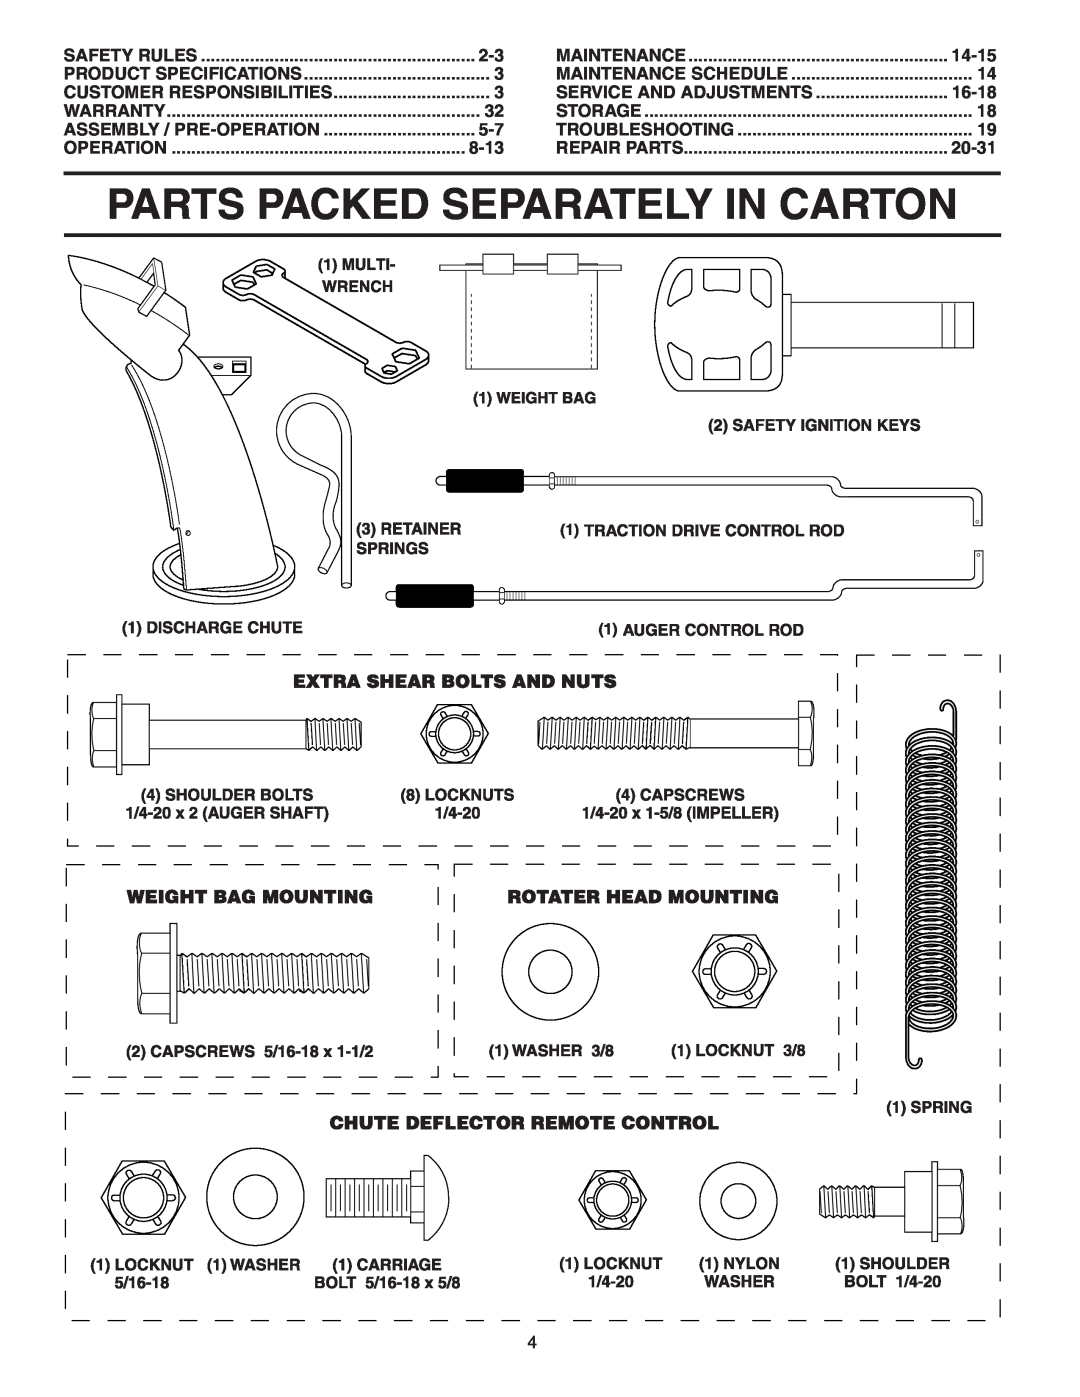 Poulan PP1130ESA Parts Packed Separately In Carton, 8-13, 14-15, Service And Adjustments, 16-18, 20-31, Safety Rules 